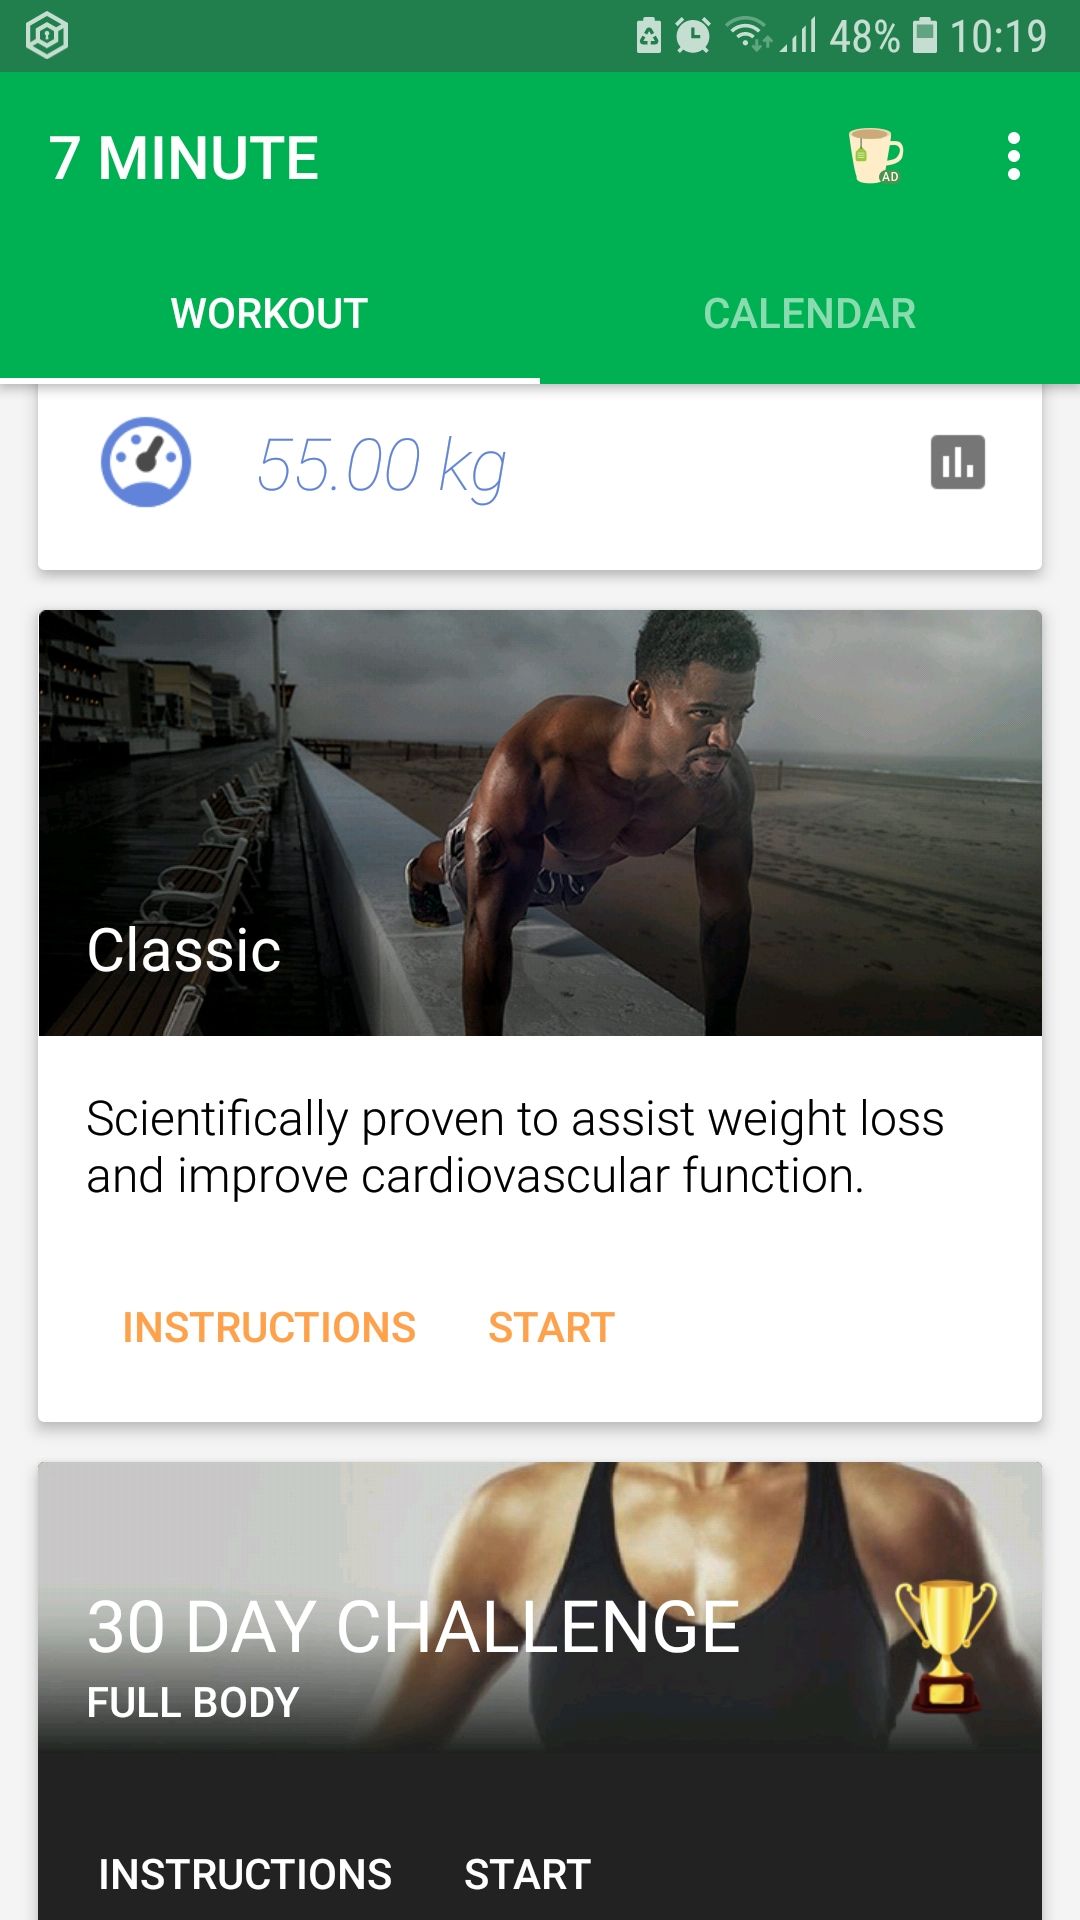 7 MINUTE WORKOUT mobile fitness app classic